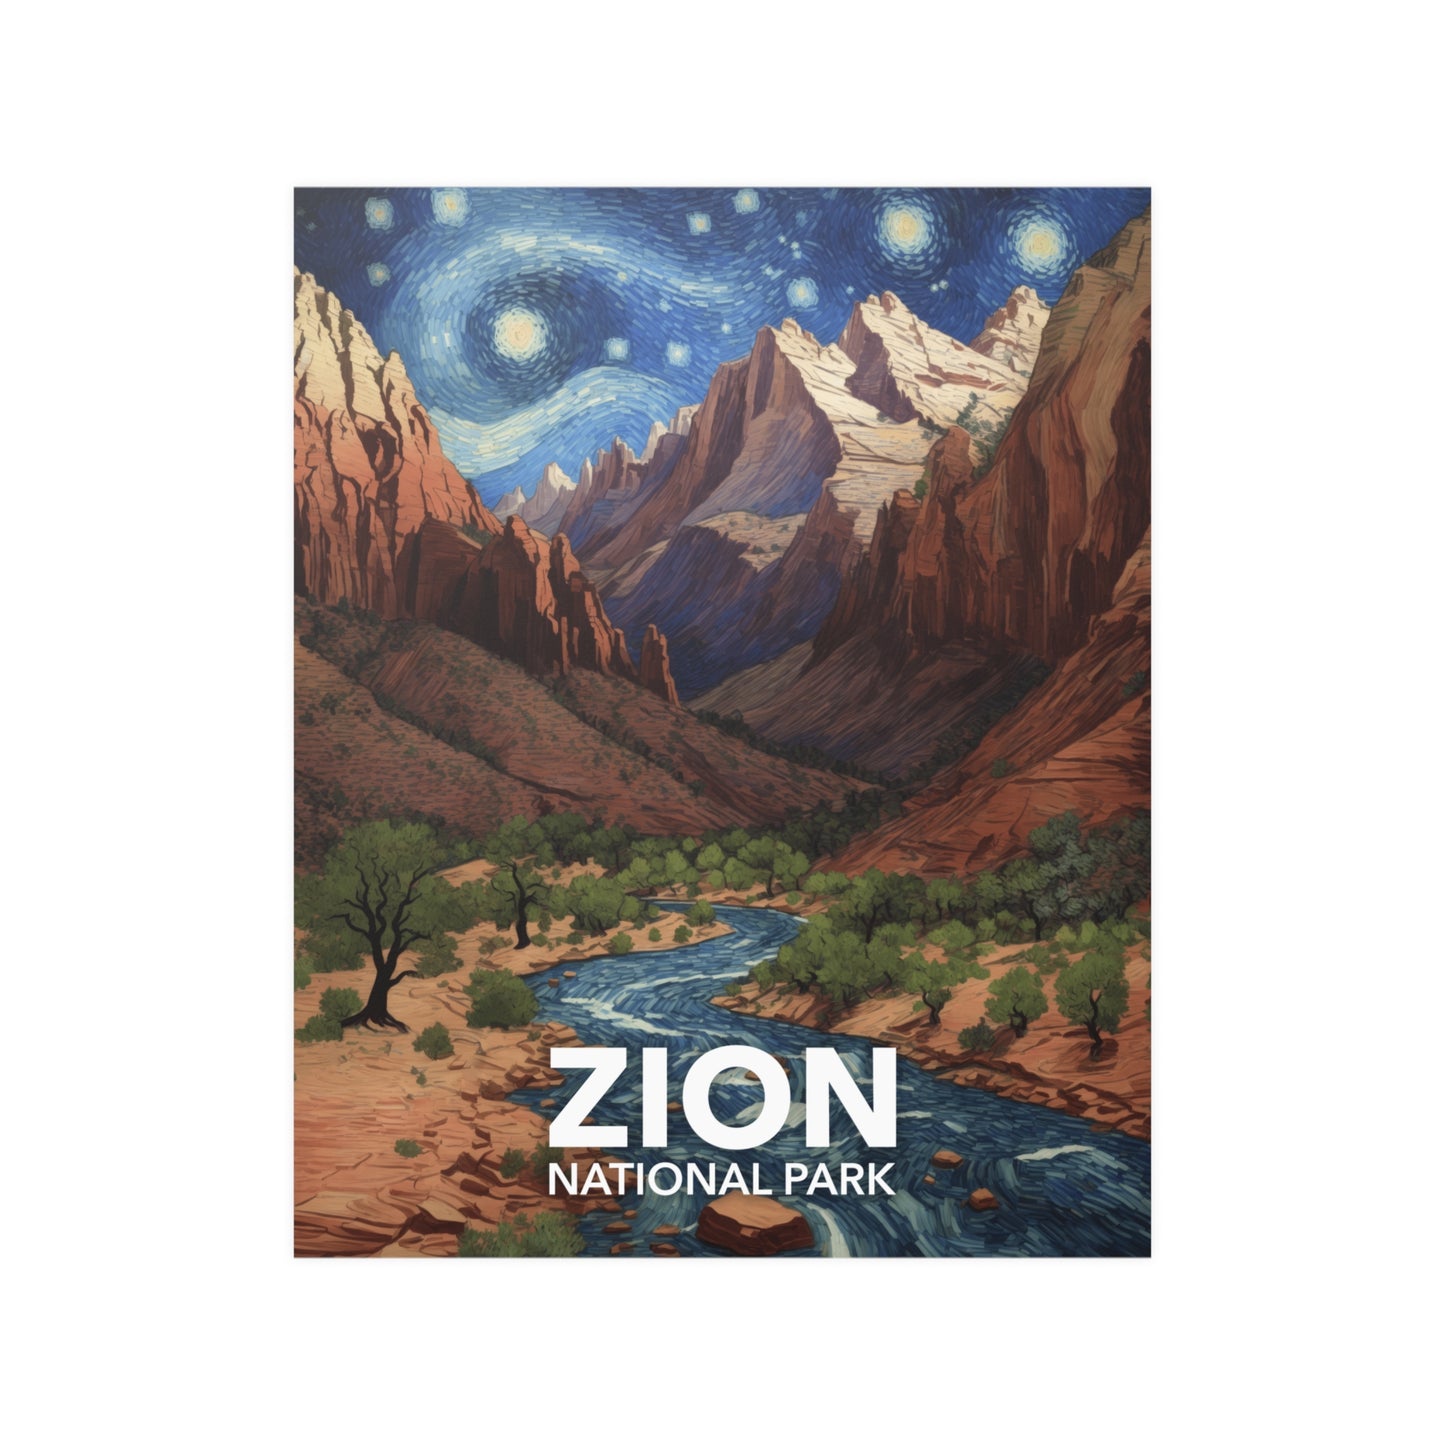 Zion National Park Poster - Starry Night